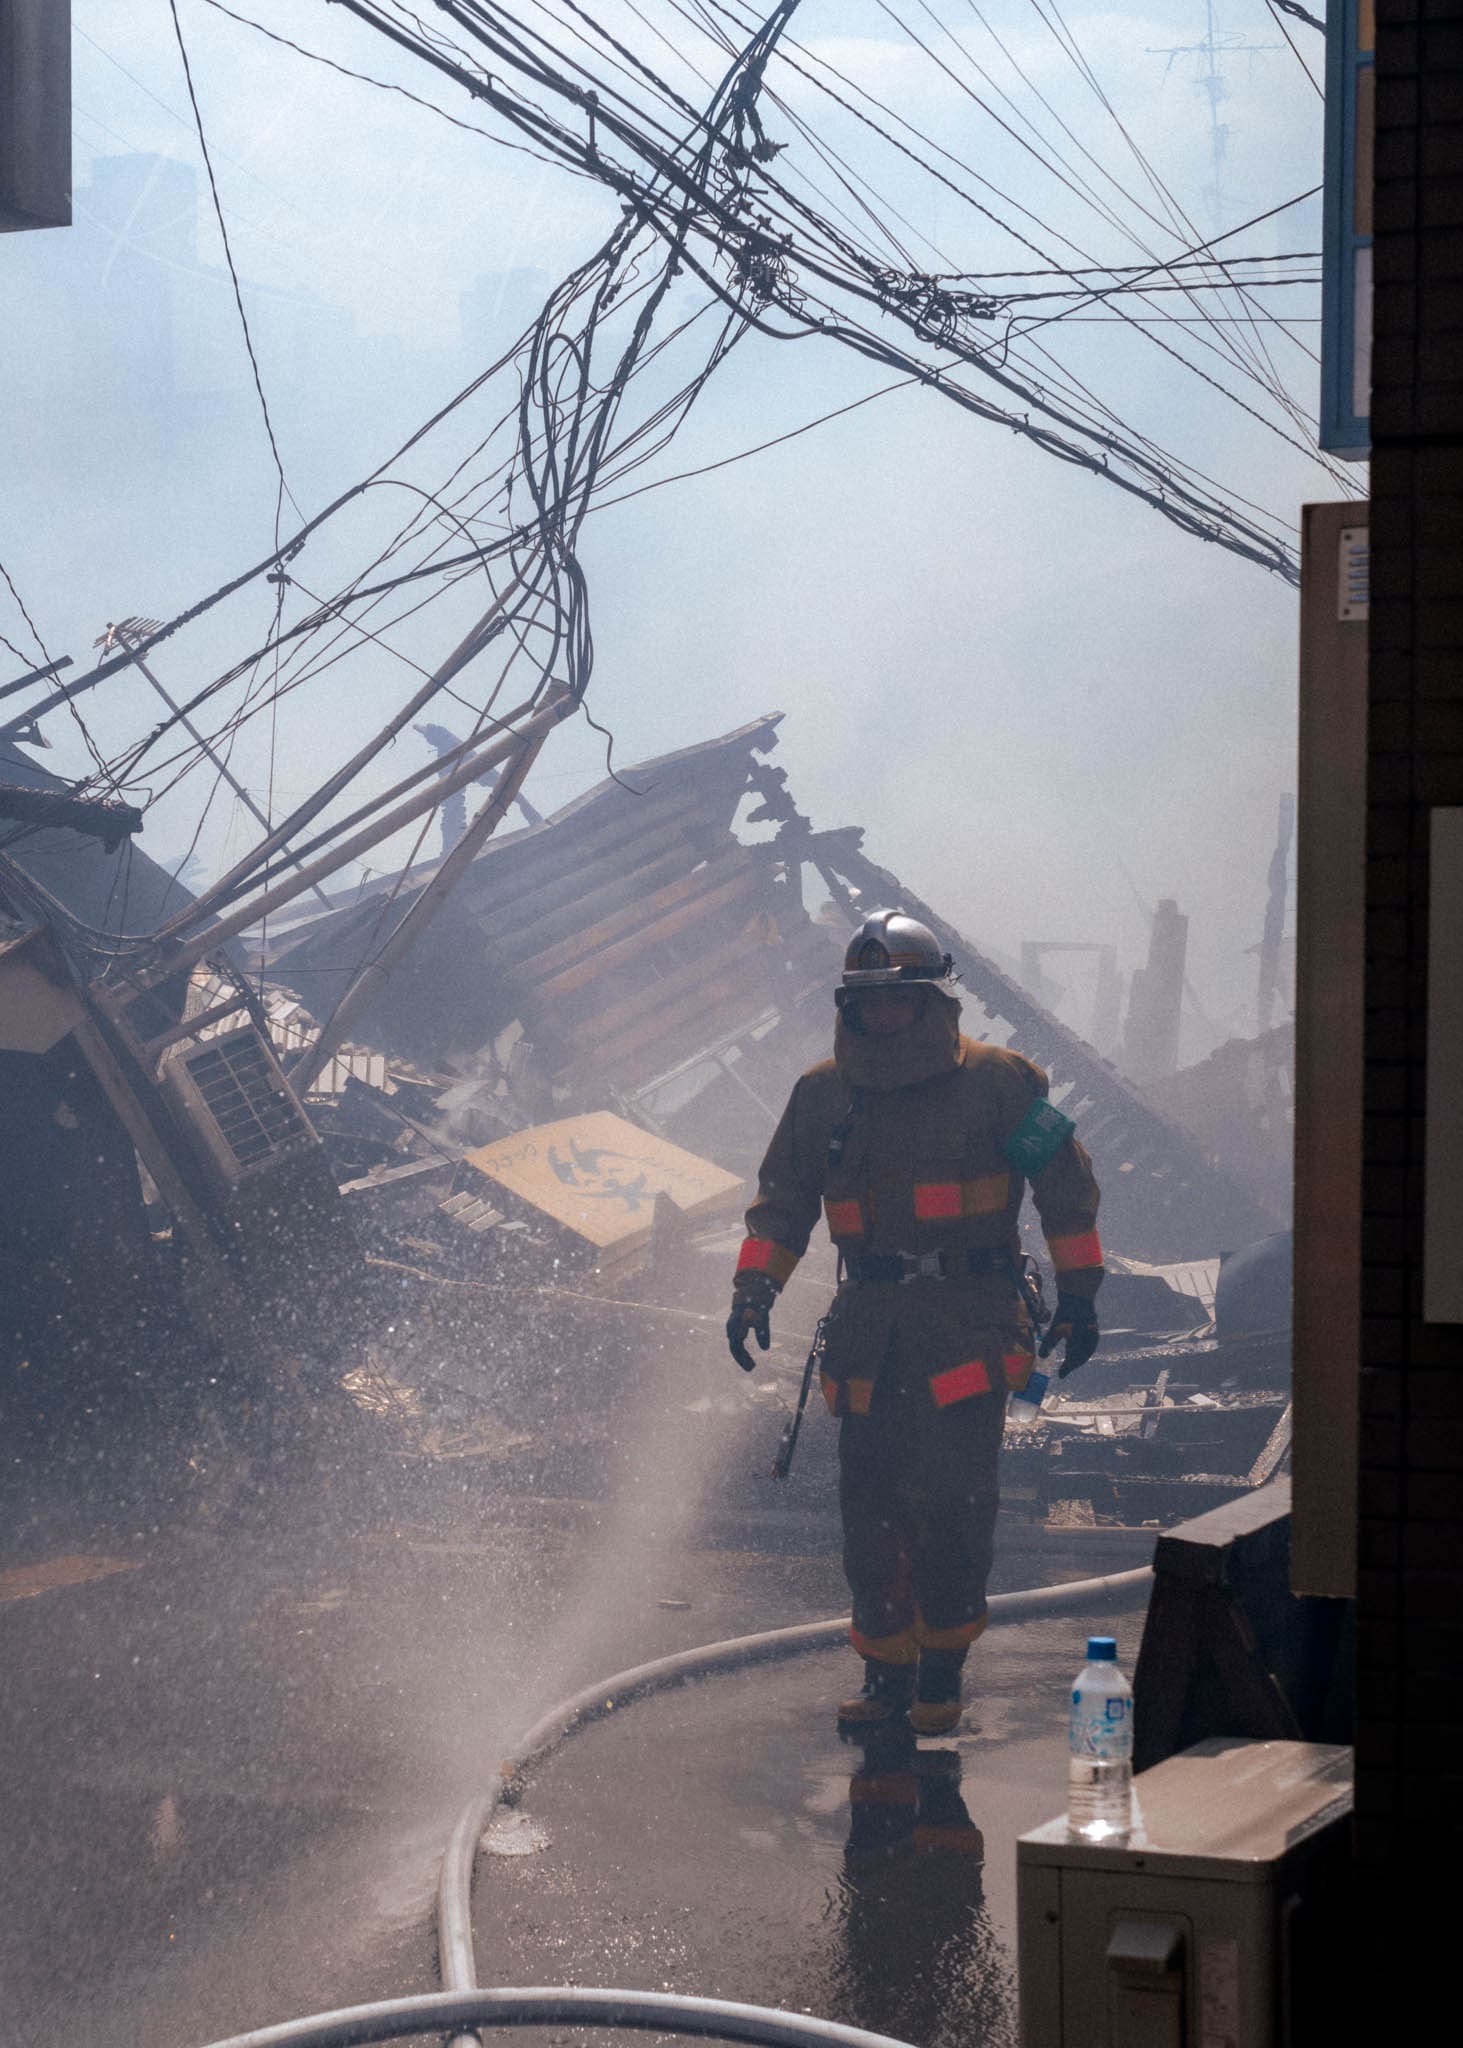 Japanese Firefighter exiting collapsed building amid emergency rescue efforts.